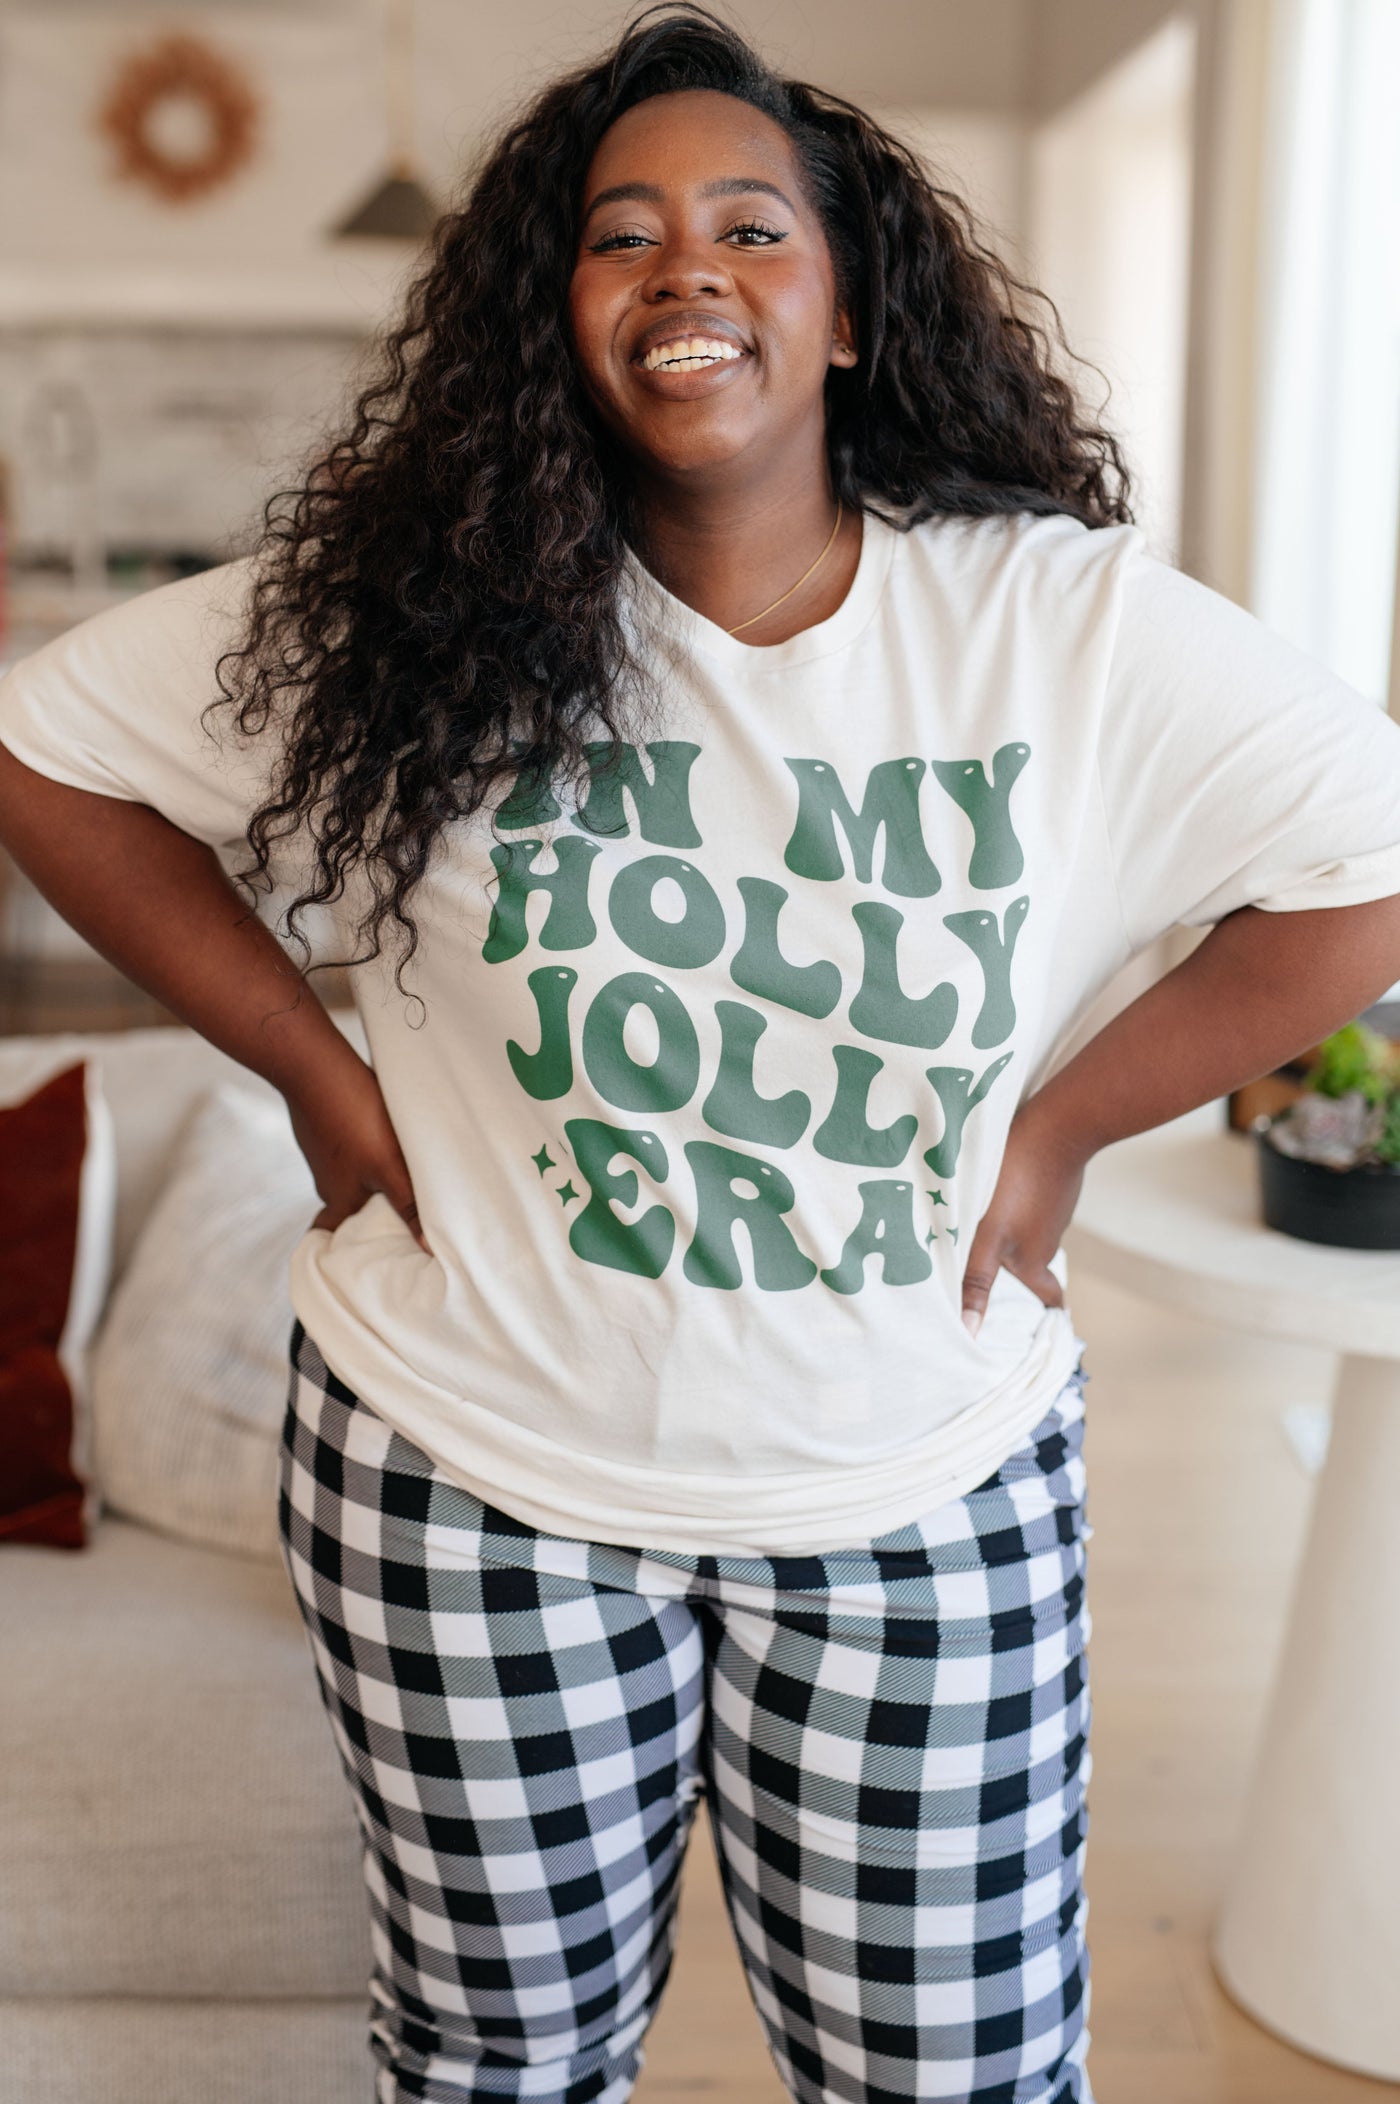 In My Holly Jolly Era Graphic T Womens Southern Soul Collectives